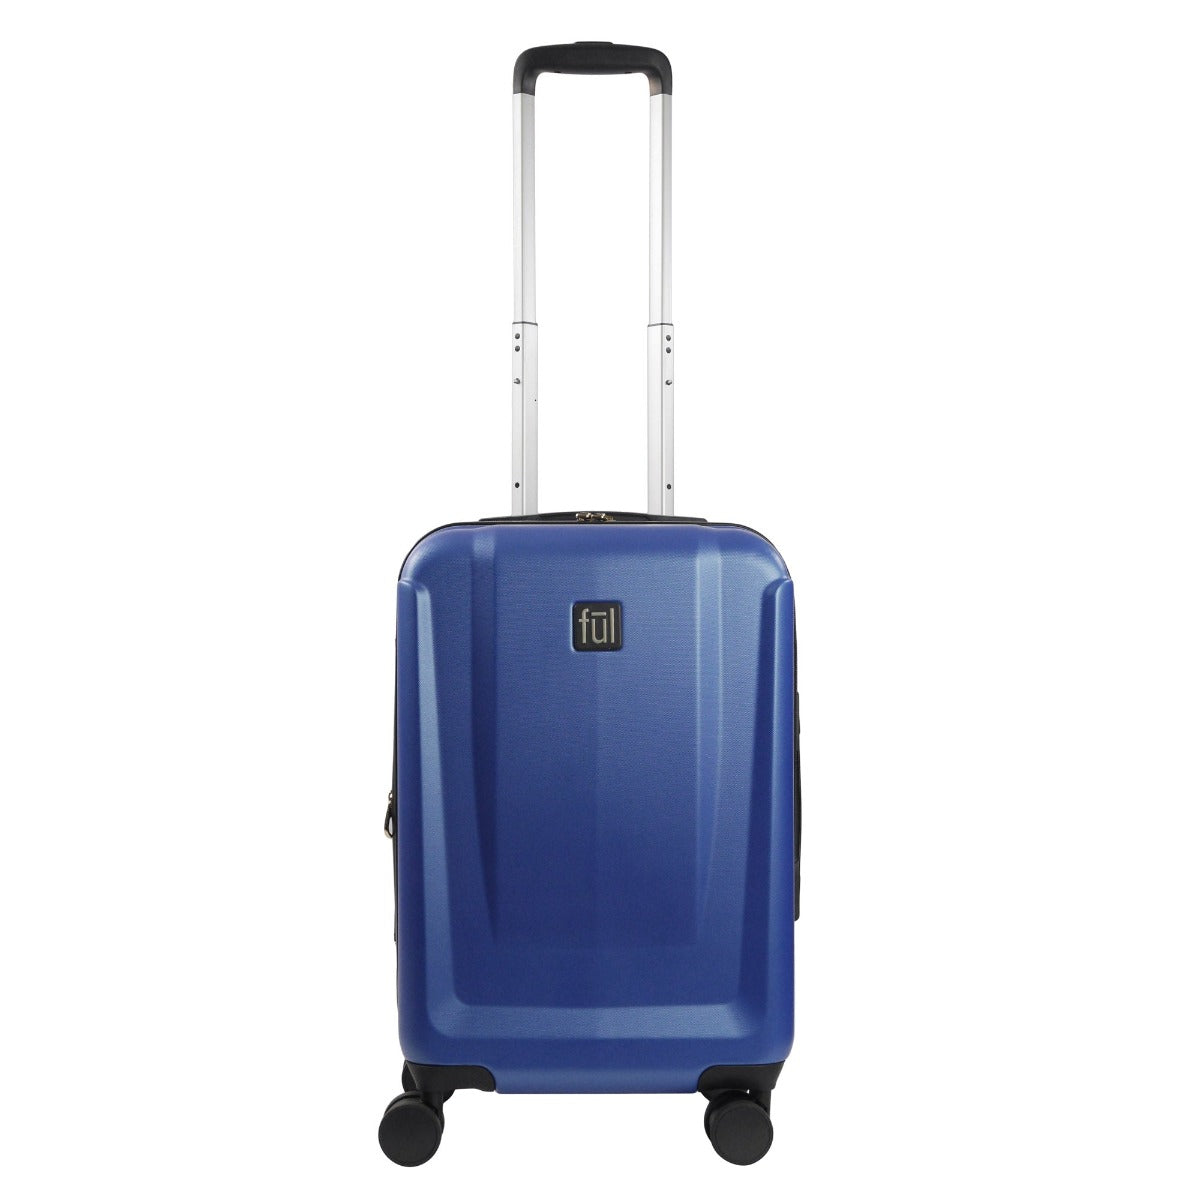 Load Rider 21" Spinner Suitcase Rolling Luggage Cobalt Blue